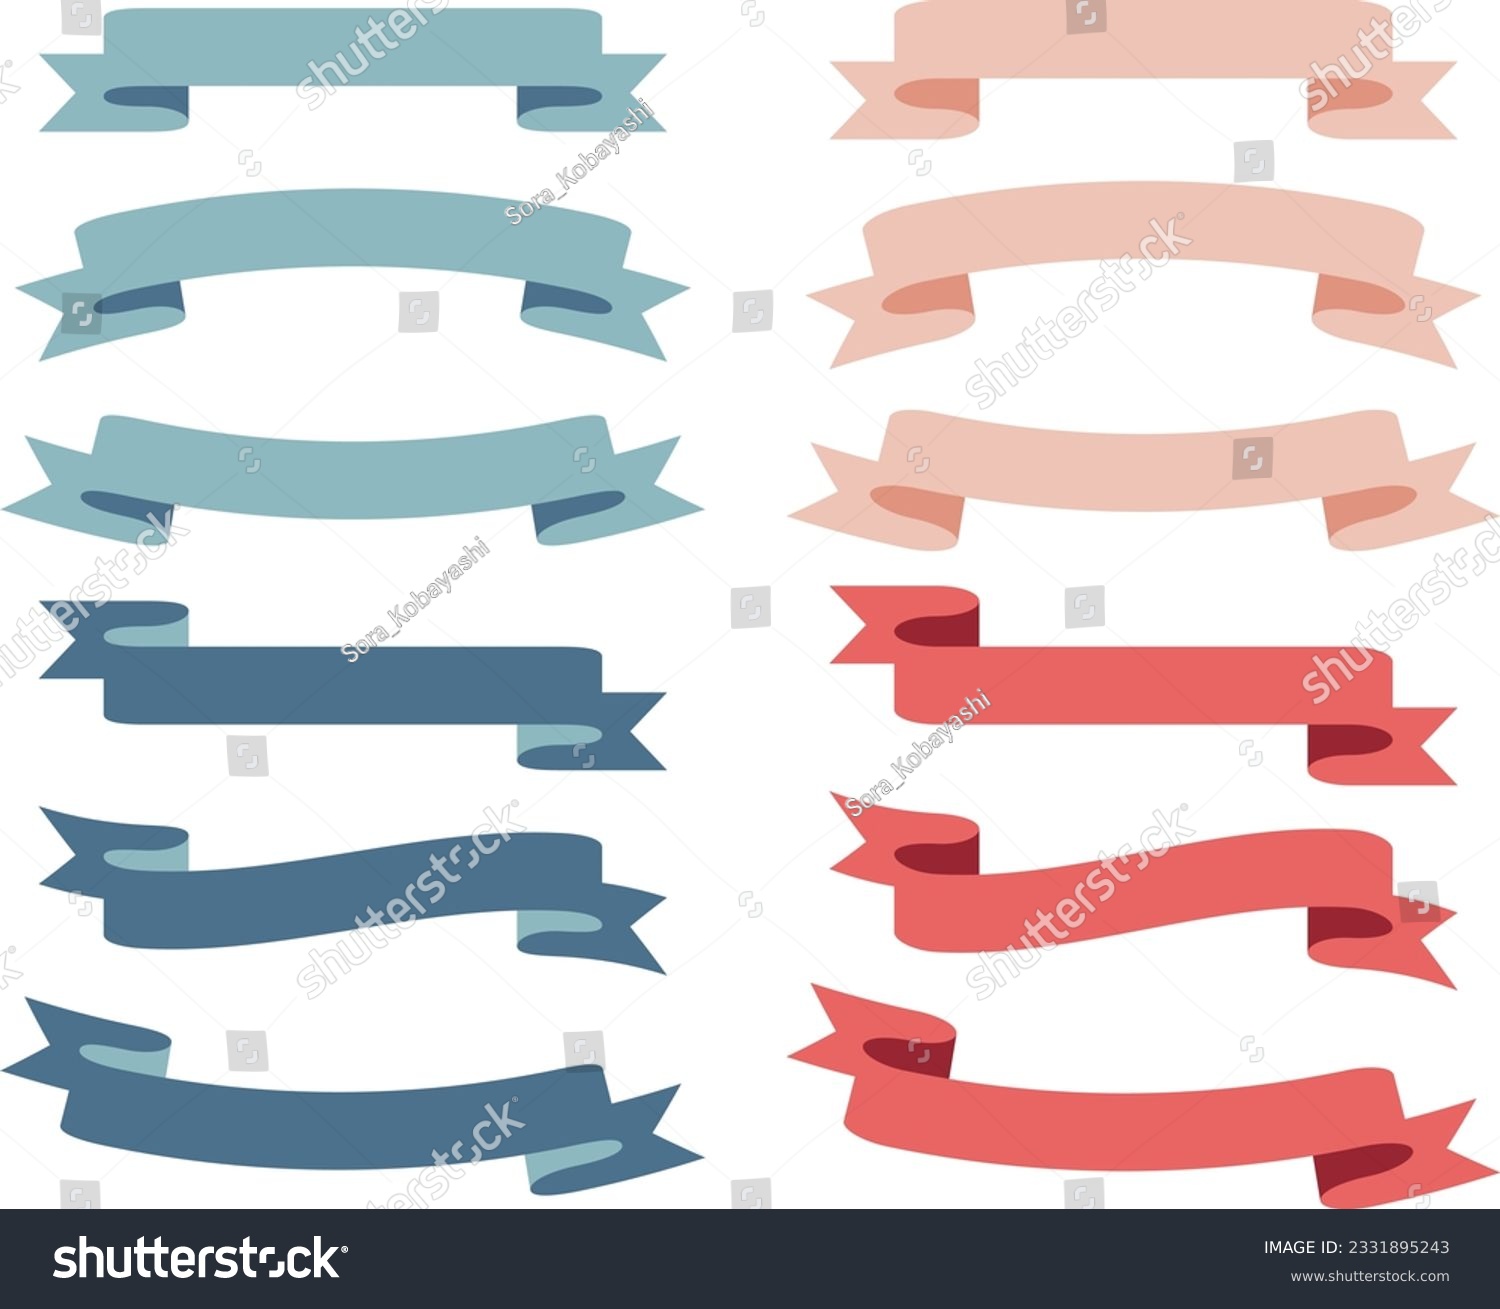 SVG of A set of simple title ribbons in pastel colors. (light blue, pink, blue and red)
Light colored ribbon frame for writing letters. svg